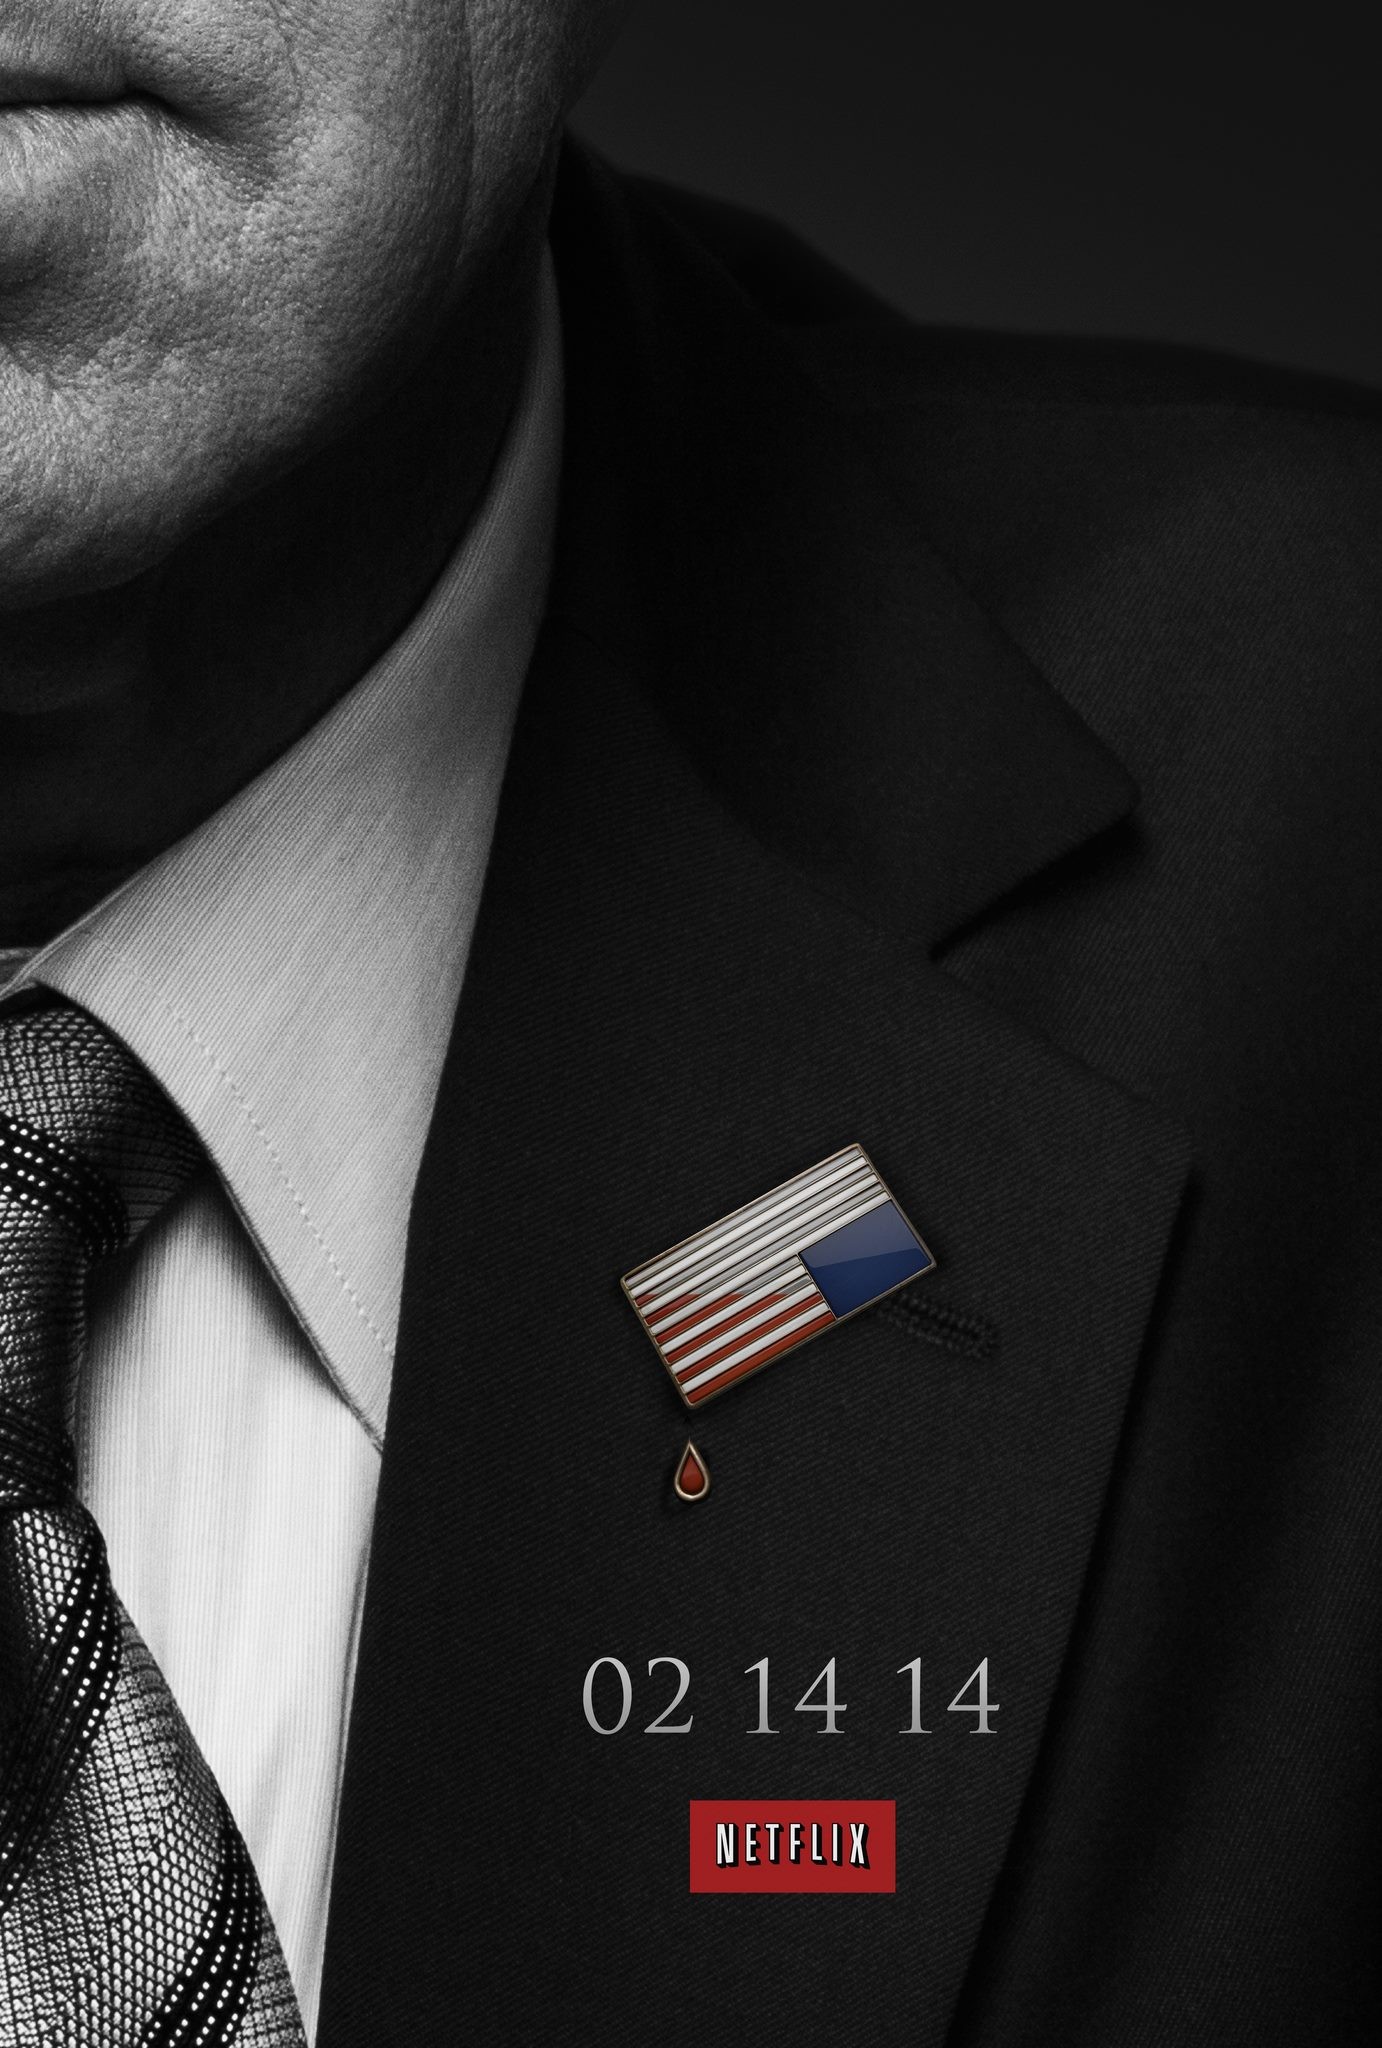 Mega Sized TV Poster Image for House of Cards (#3 of 10)